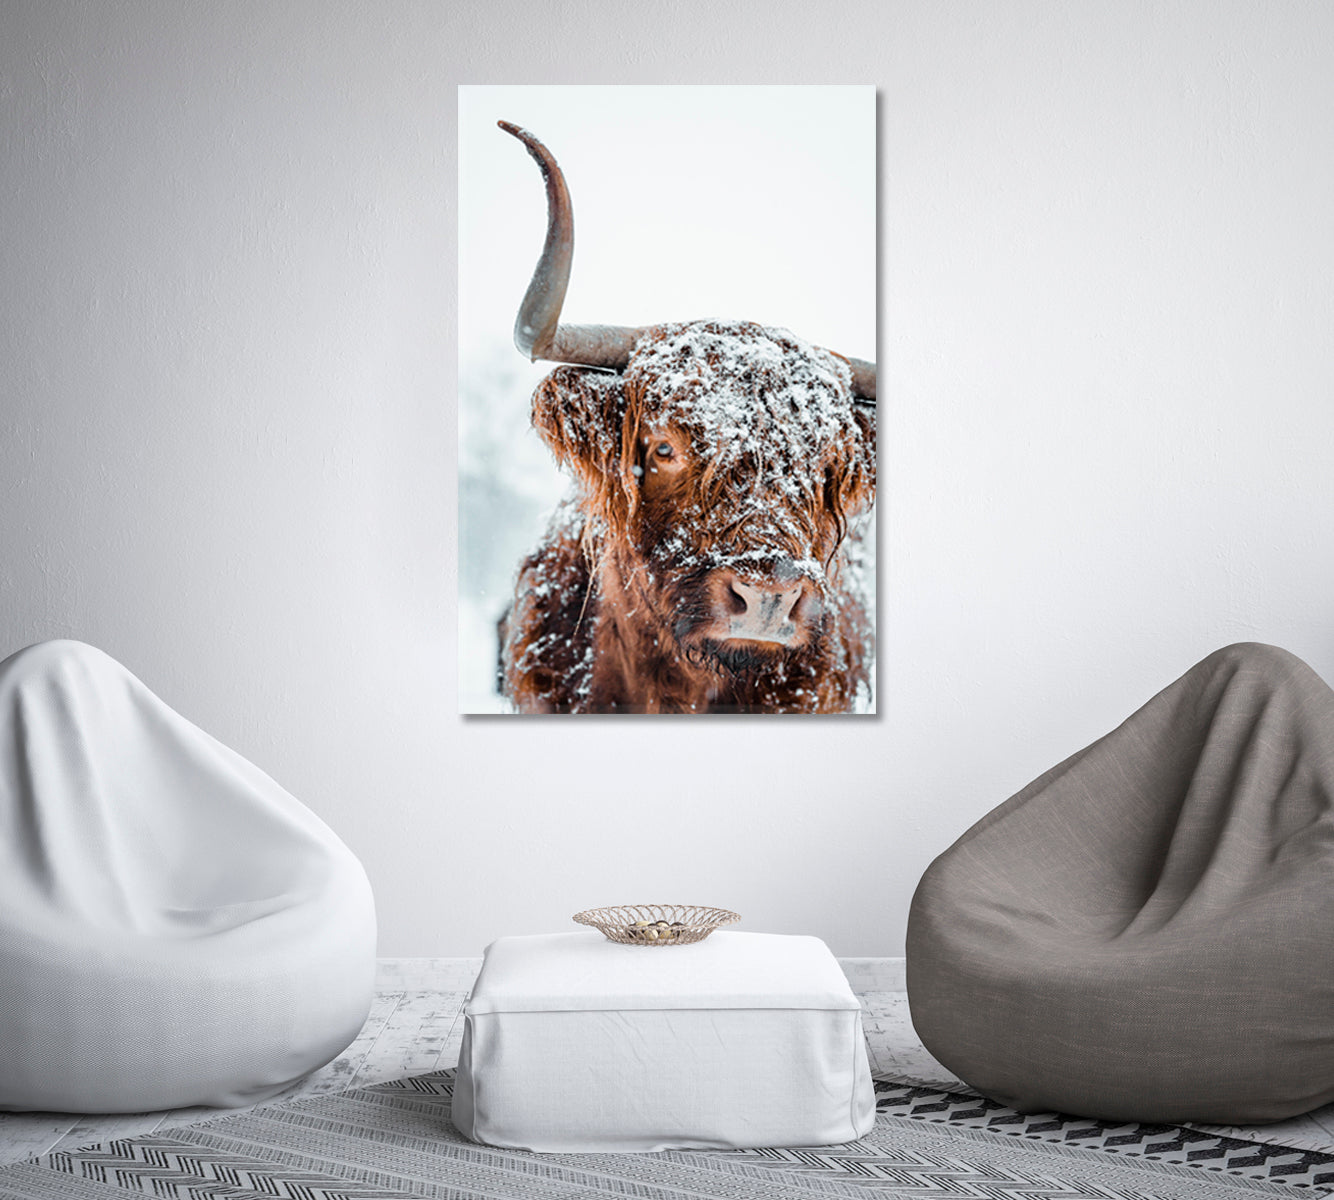 Highland Cow Covered With Snow Art Canvas-Canvas Print-CetArt-1 panel-16x24 inches-CetArt